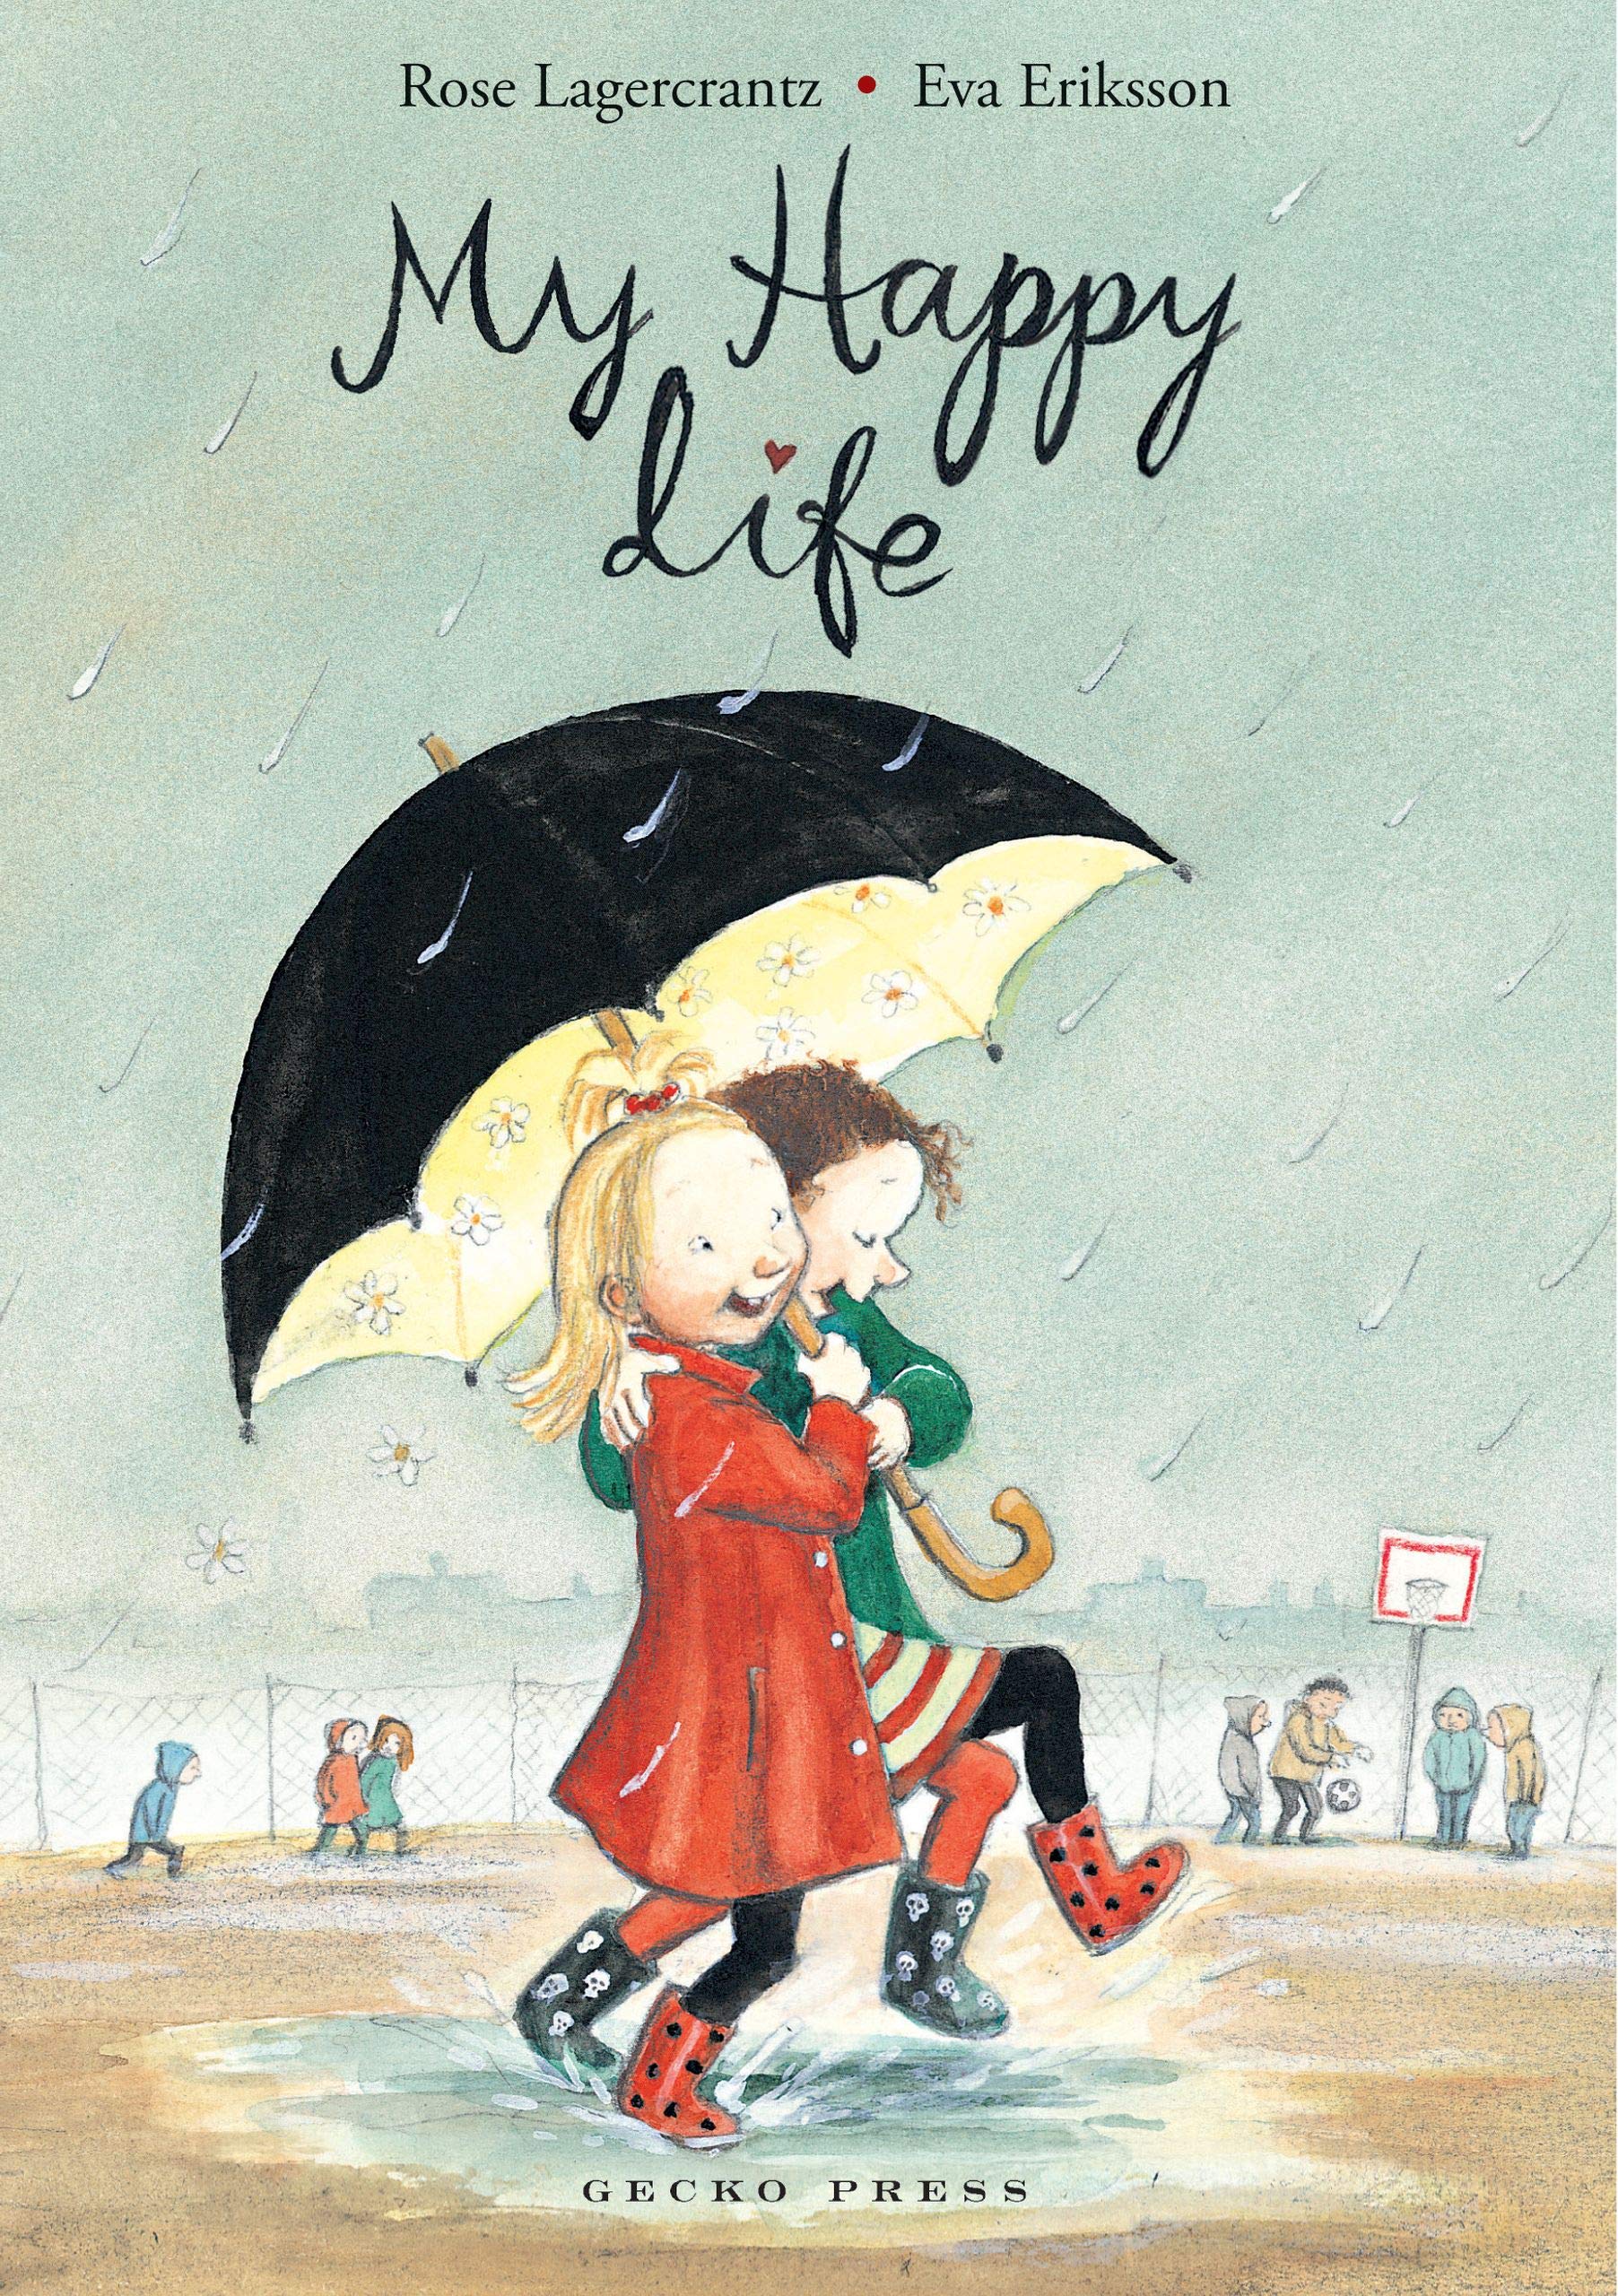 Two young white girls splash in the rain sharing a black umbrella | One girl is blonde wearing a red raincoat | The other girl has dark curly hair and is wearing a green raincoat | Both are laughing and smiling